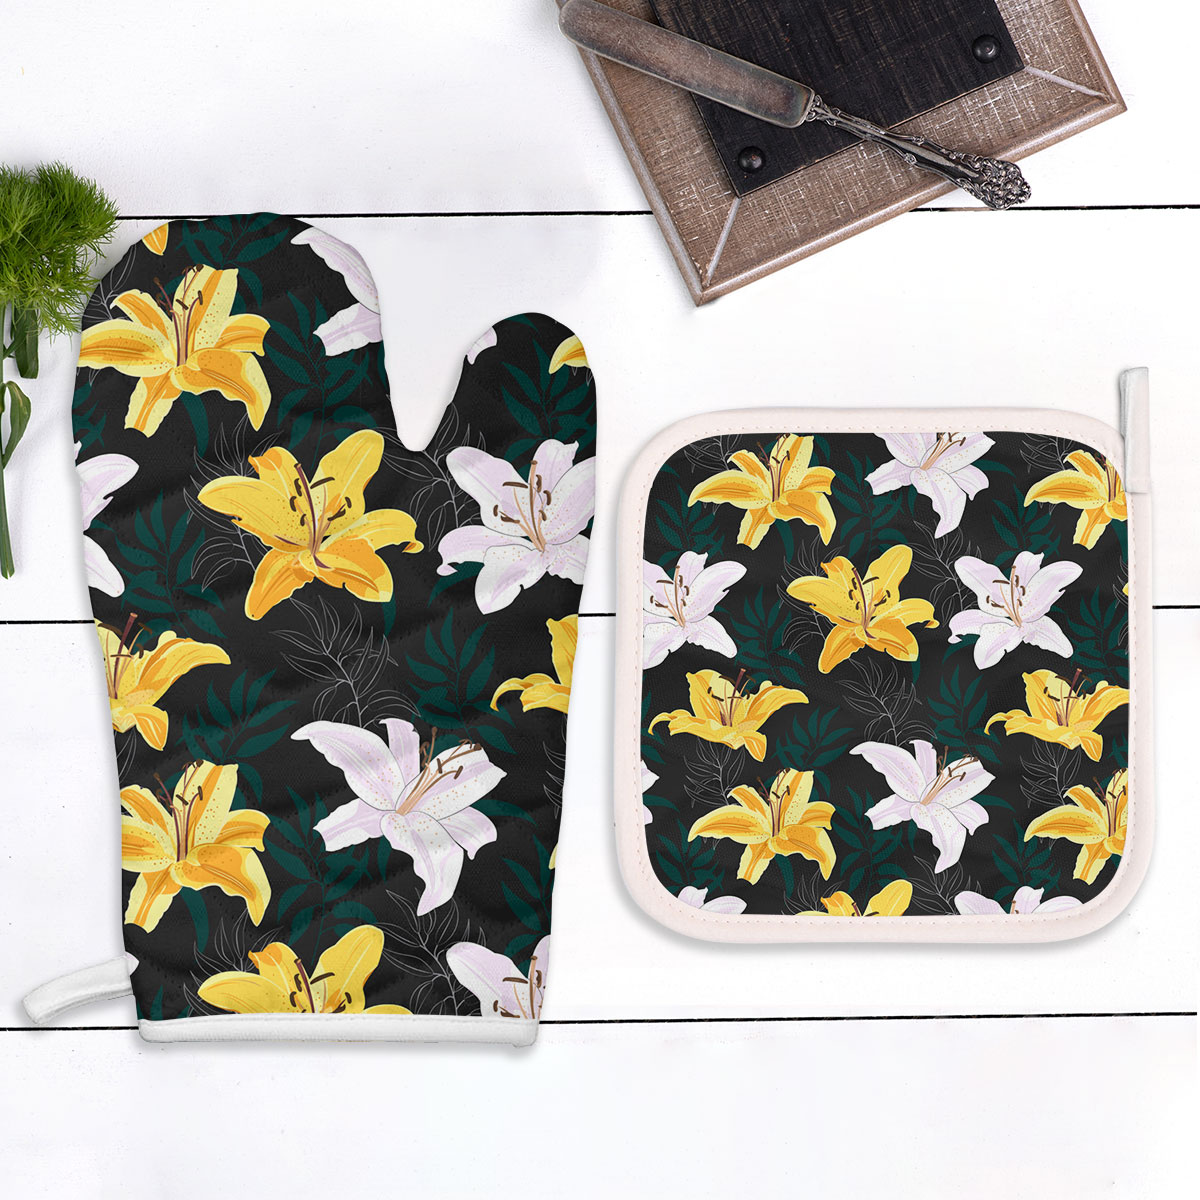 Yellow And White Lily Flowers Oven Mitts Pot Holder Set